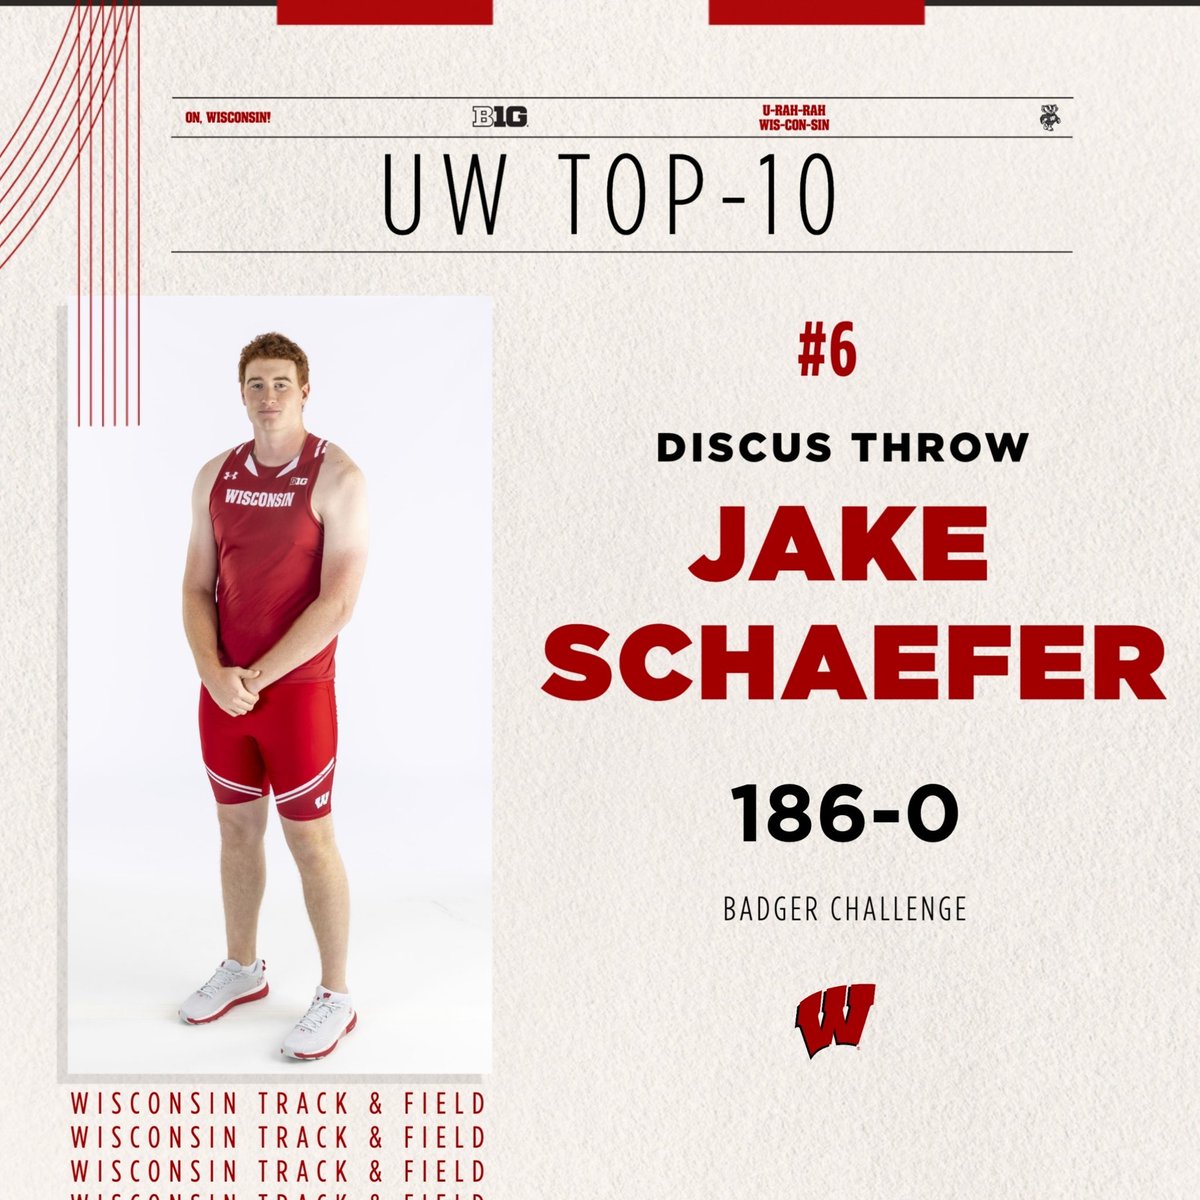 𝙀𝙡𝙞𝙩𝙚 𝙘𝙤𝙢𝙥𝙖𝙣𝙮 🫡 Jake Schaefer enters the UW top 10 list in the discus throw at No. 6 with a distance of 186-0! Congrats Jake 🥳 #OnWisconsin || #Badgers